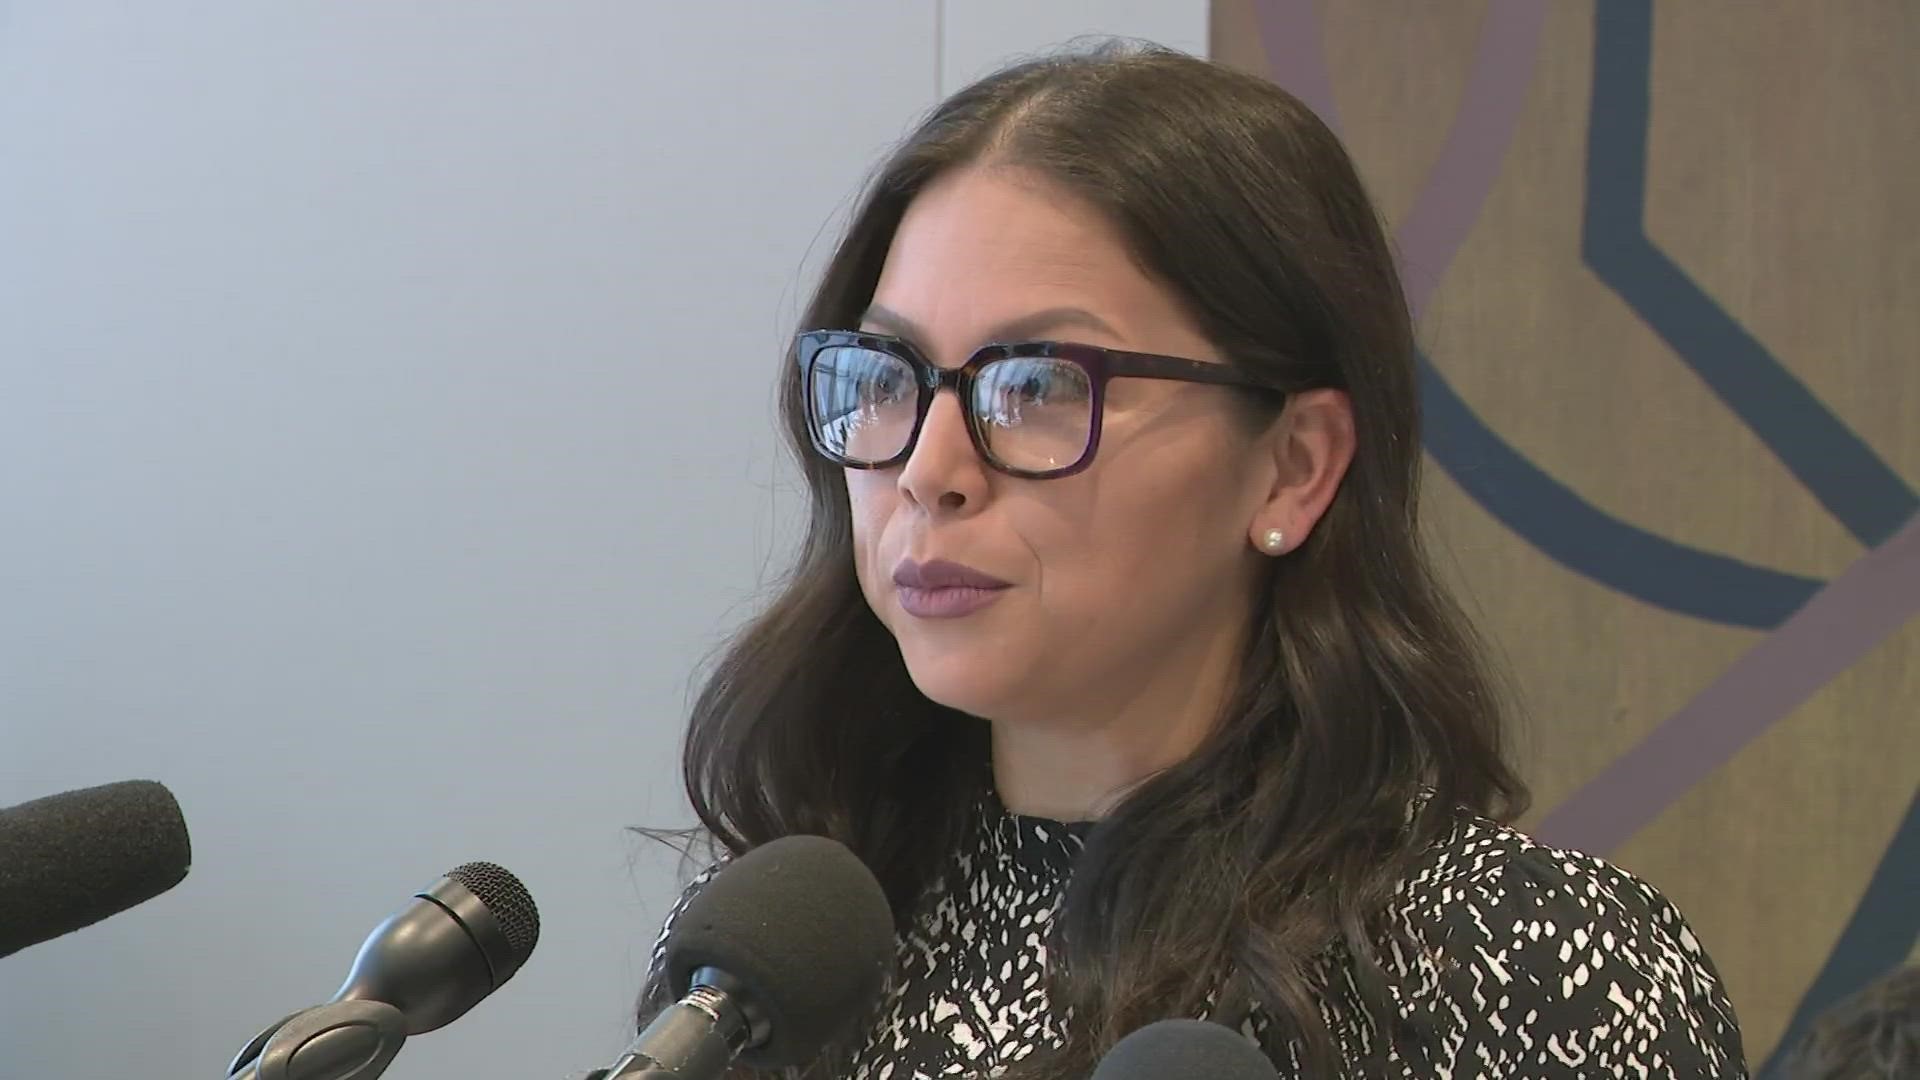 Erika Rios and her attorney asked for the City of Galveston to pay for damage done to her home and publicly apologize for the raid. They want it done by Friday.